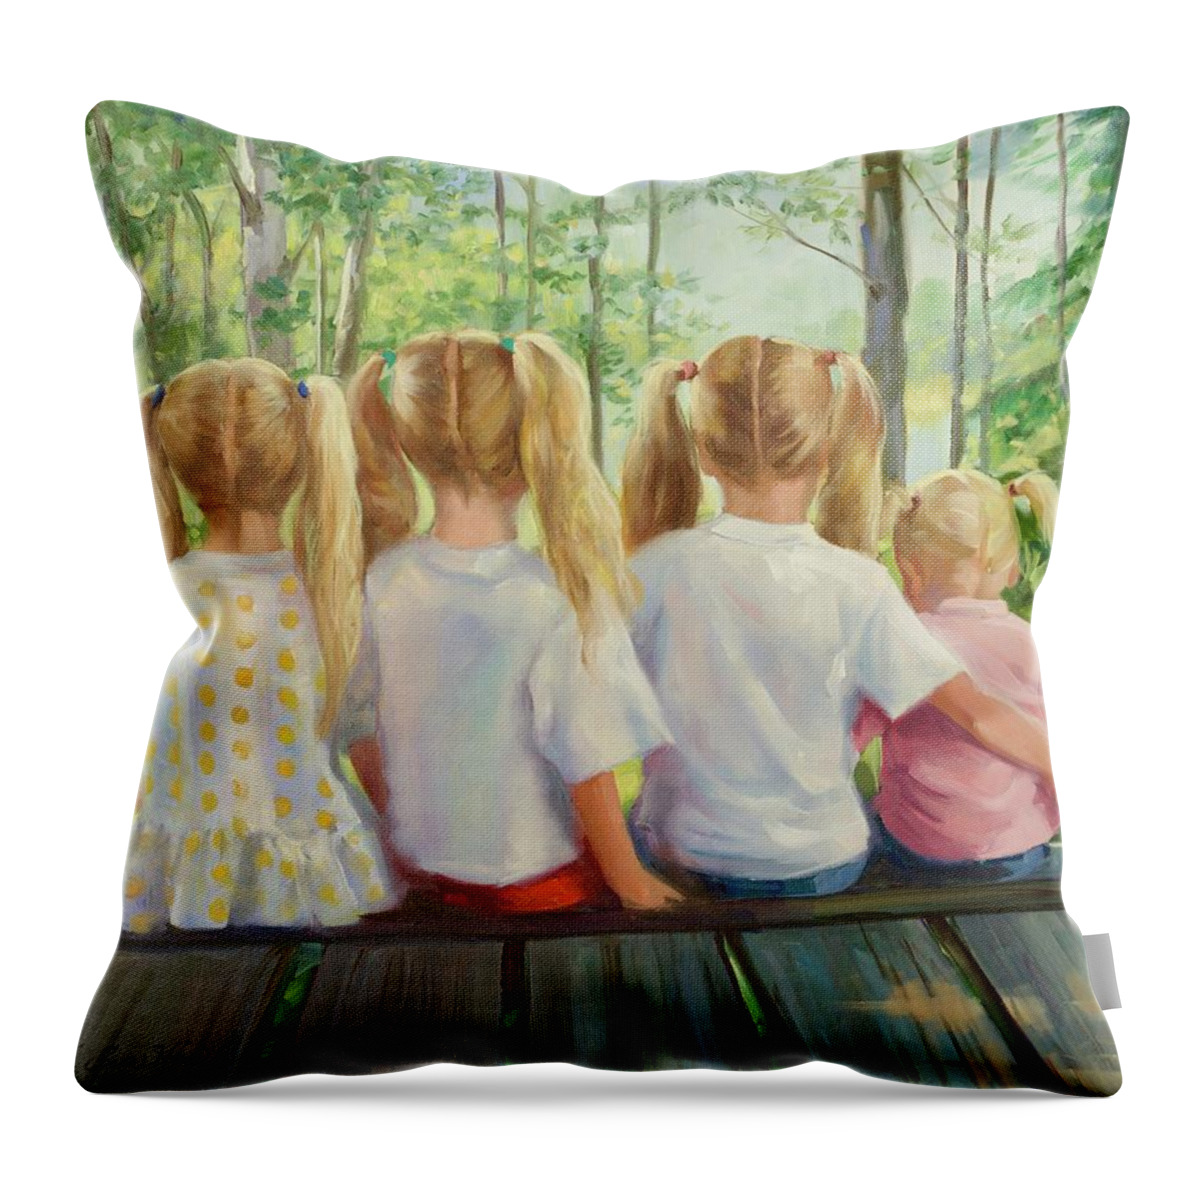 Sister Love Throw Pillow featuring the painting Four in a Row by Laurie Snow Hein